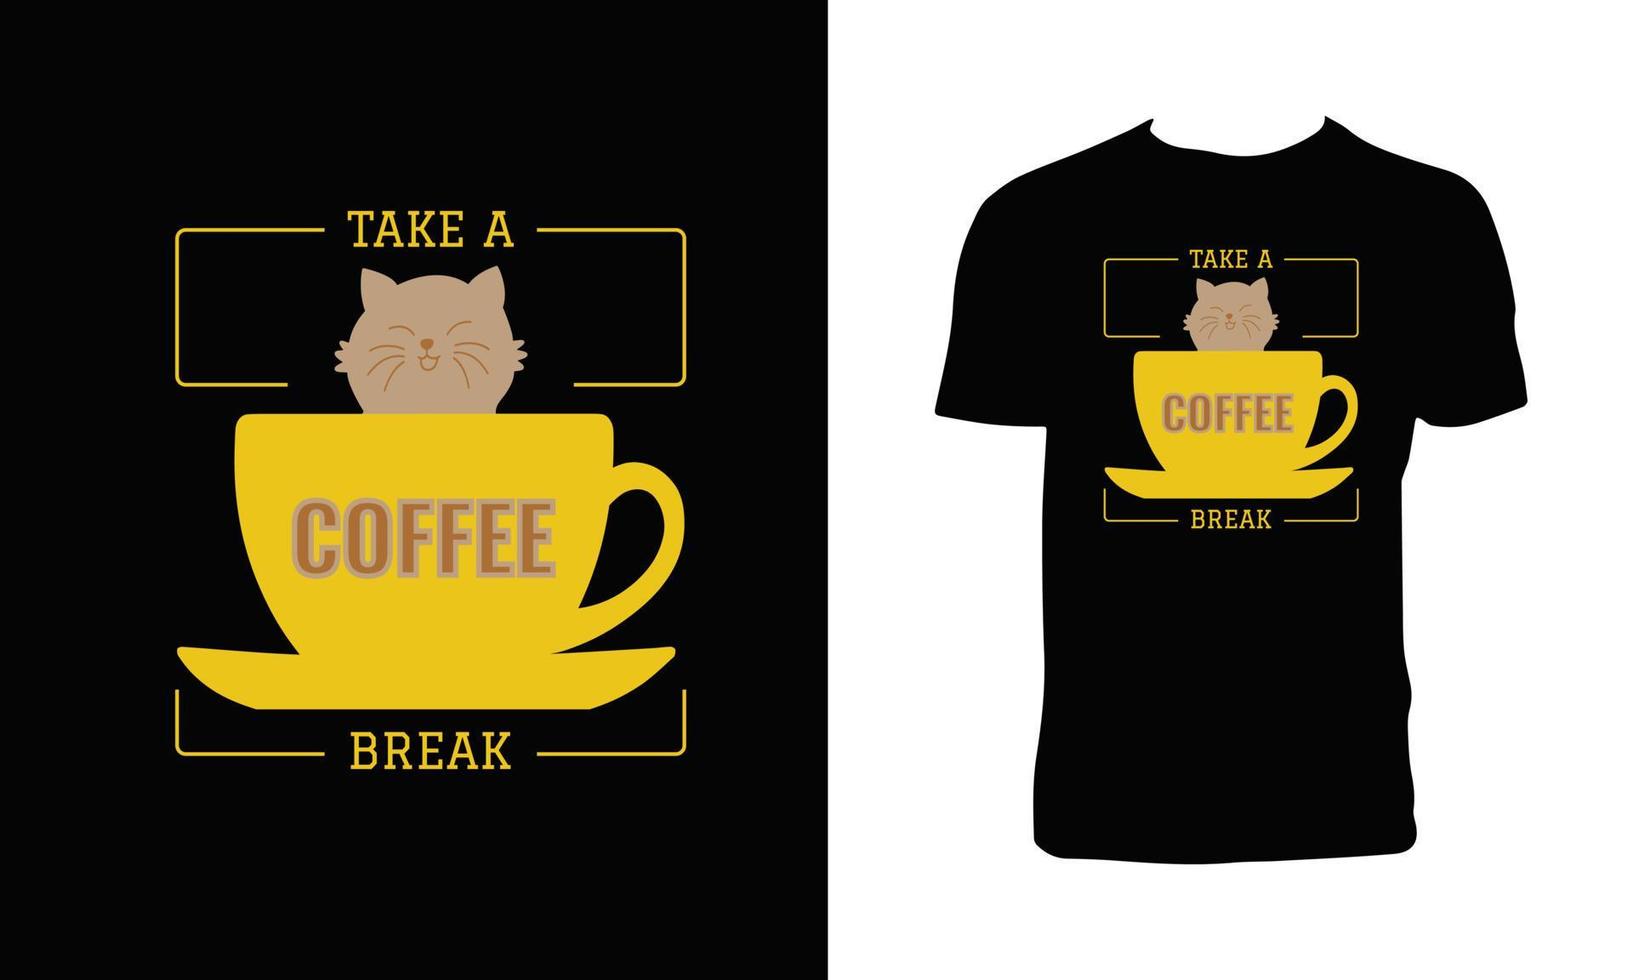 Take A Coffee Break T Shirt Design With Coffee Cup And Cat Vector Illustration.